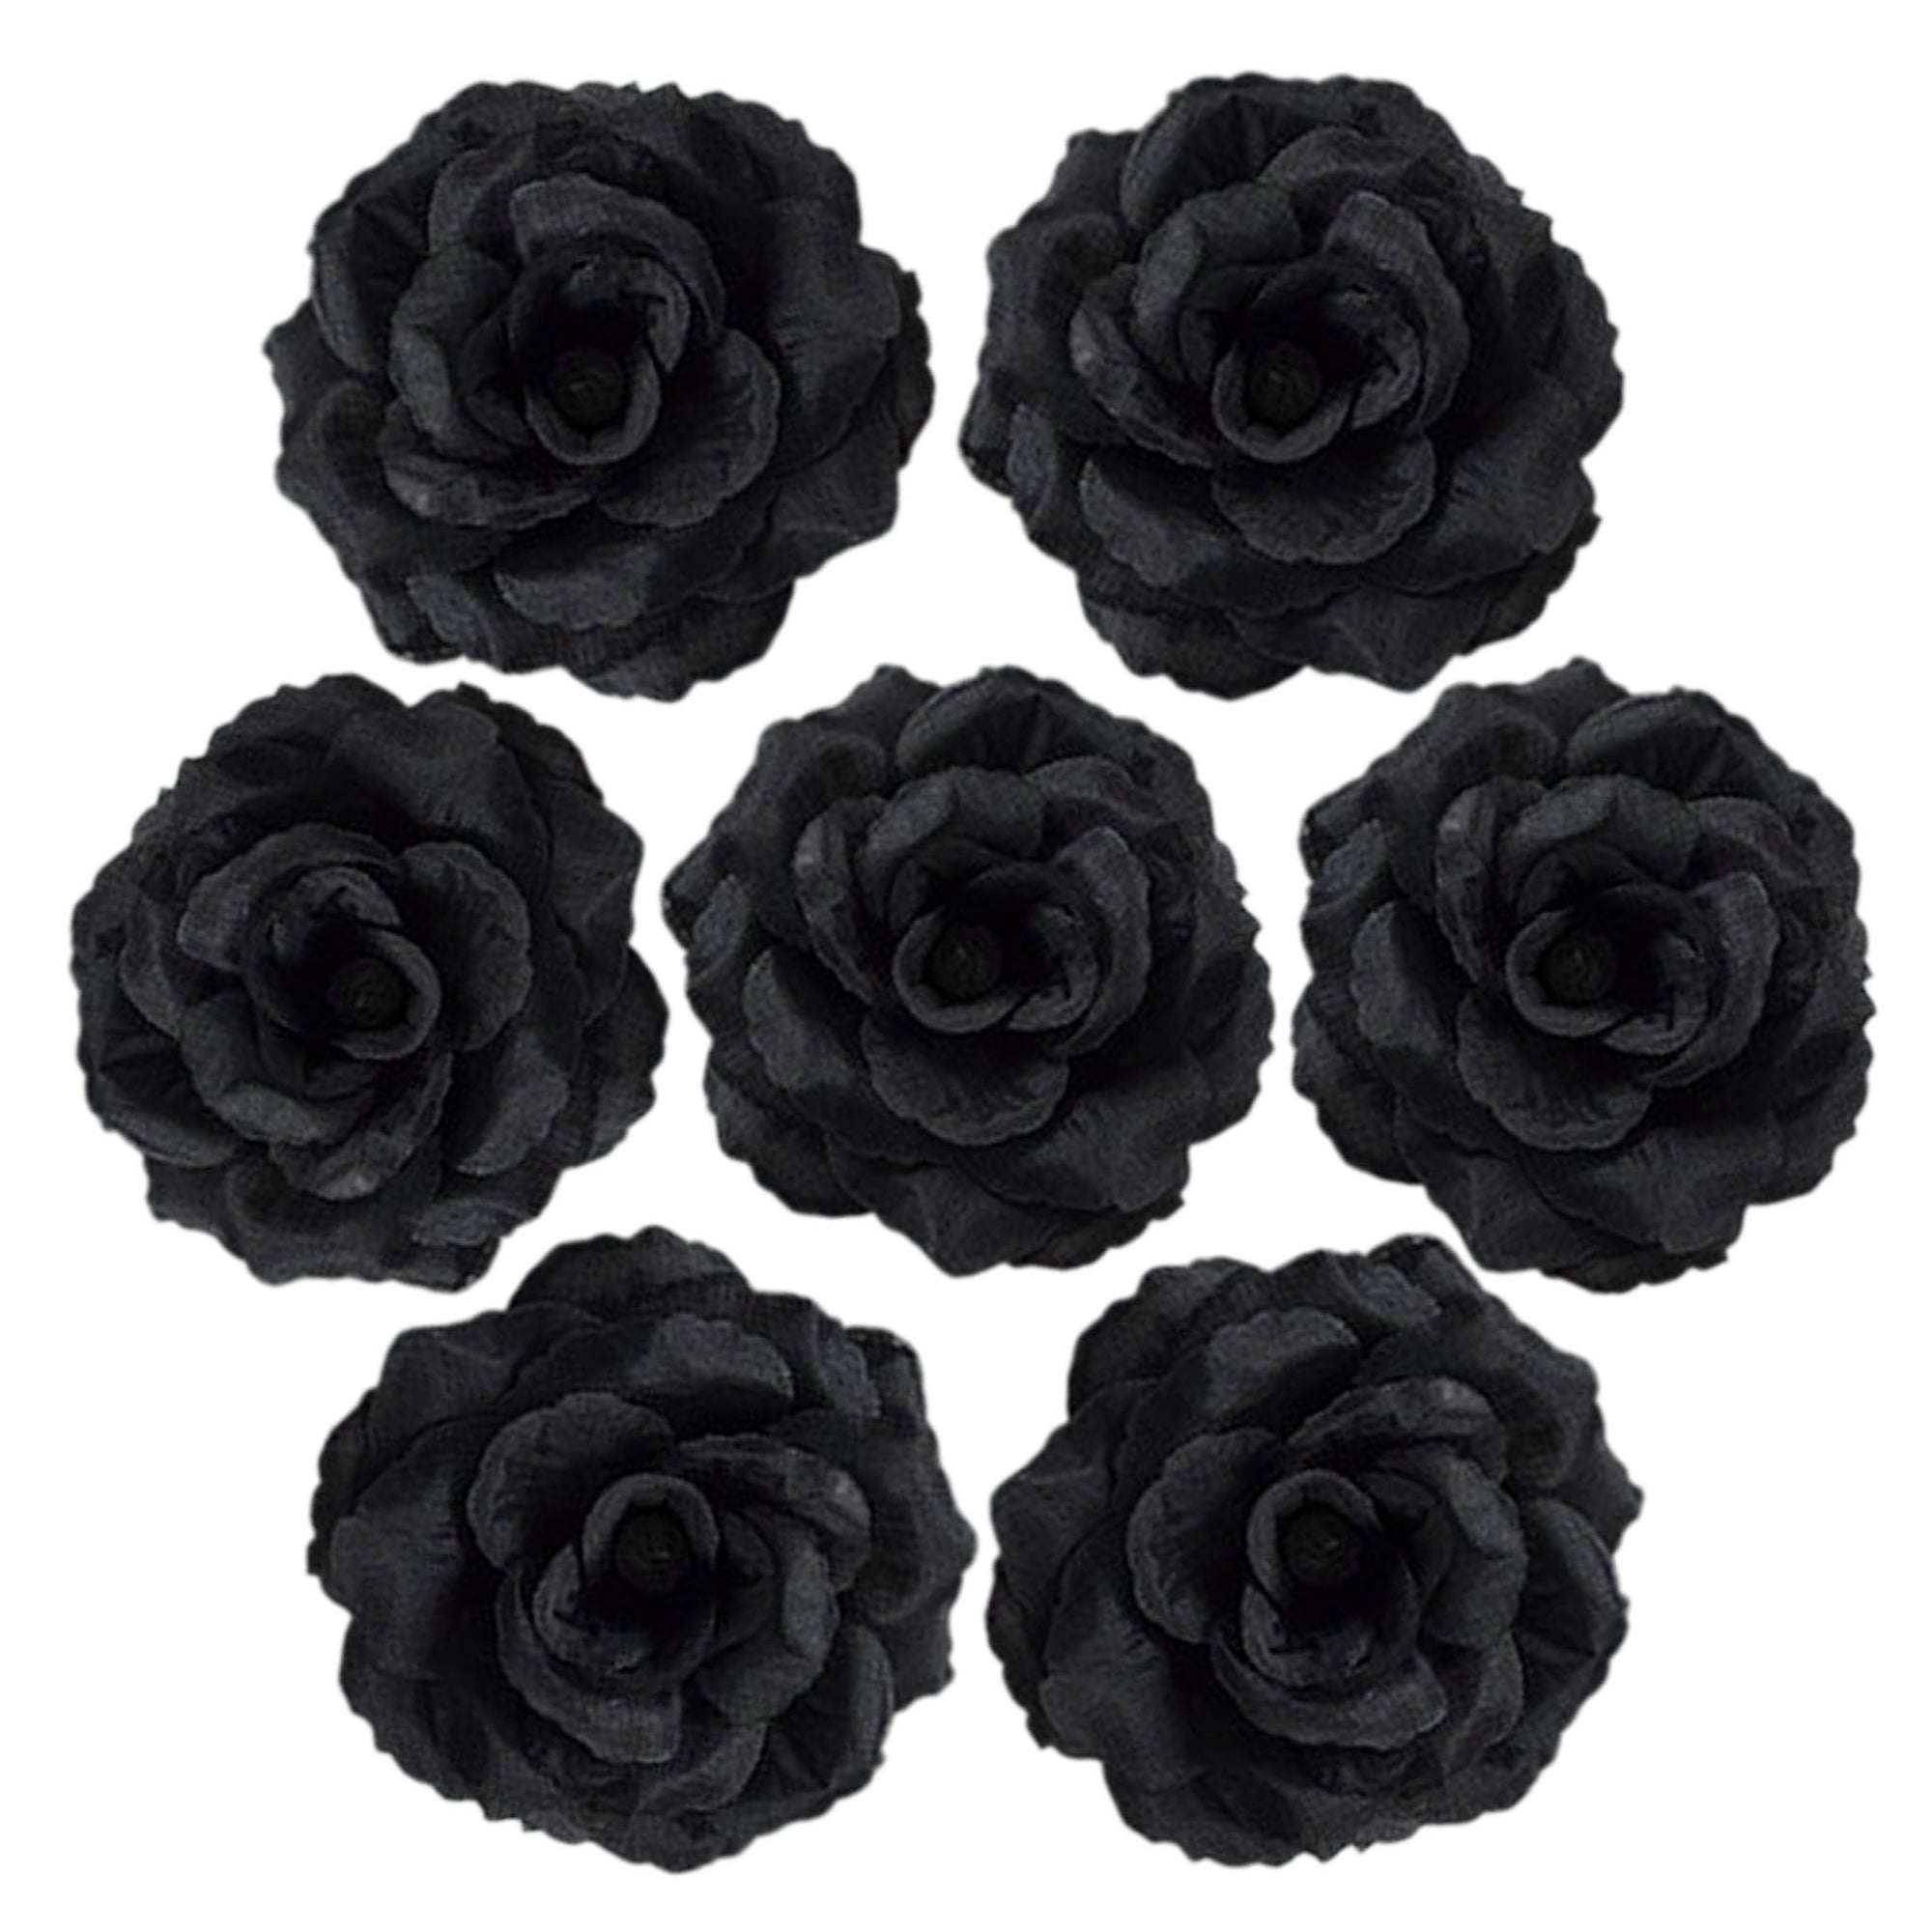 Wholesale Silk Flower Heads Artificial Roses 3 inch 100 Flowers For Flower Ball DIY